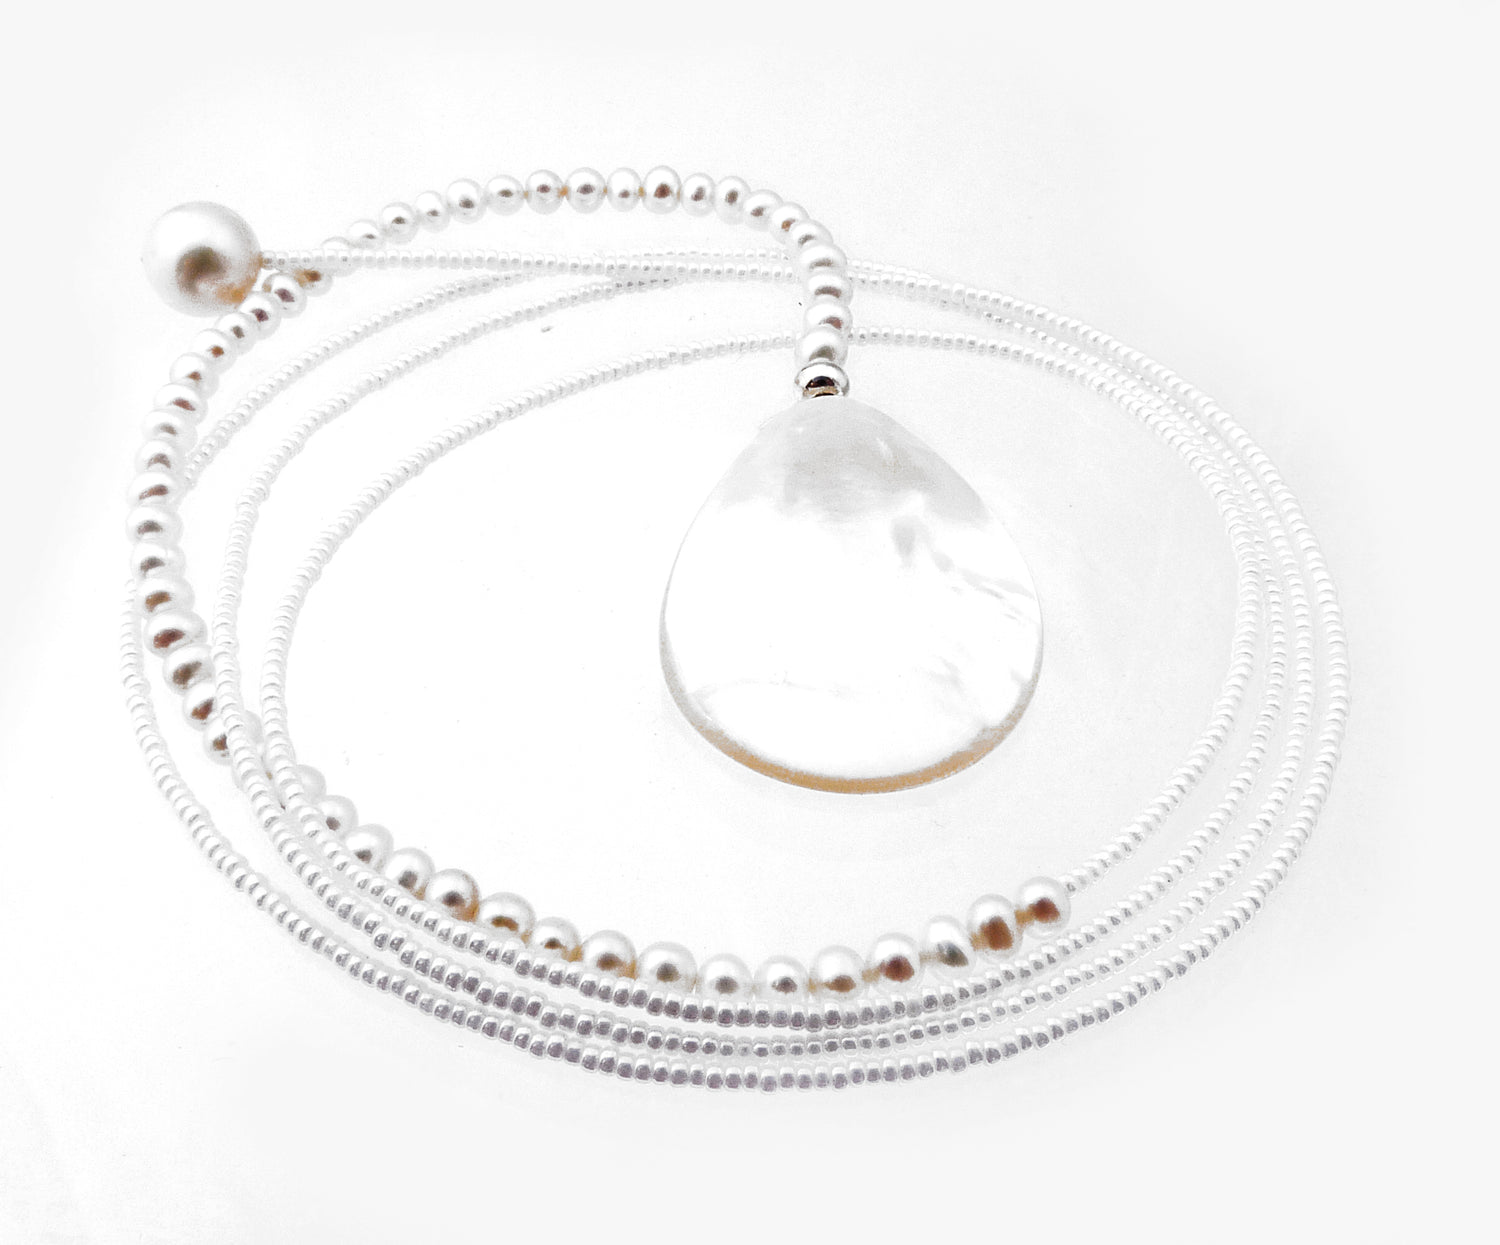 Freshwater Pearl Diane Keaton Lariat Necklace Somethings Gotta Give Lasso Necklace